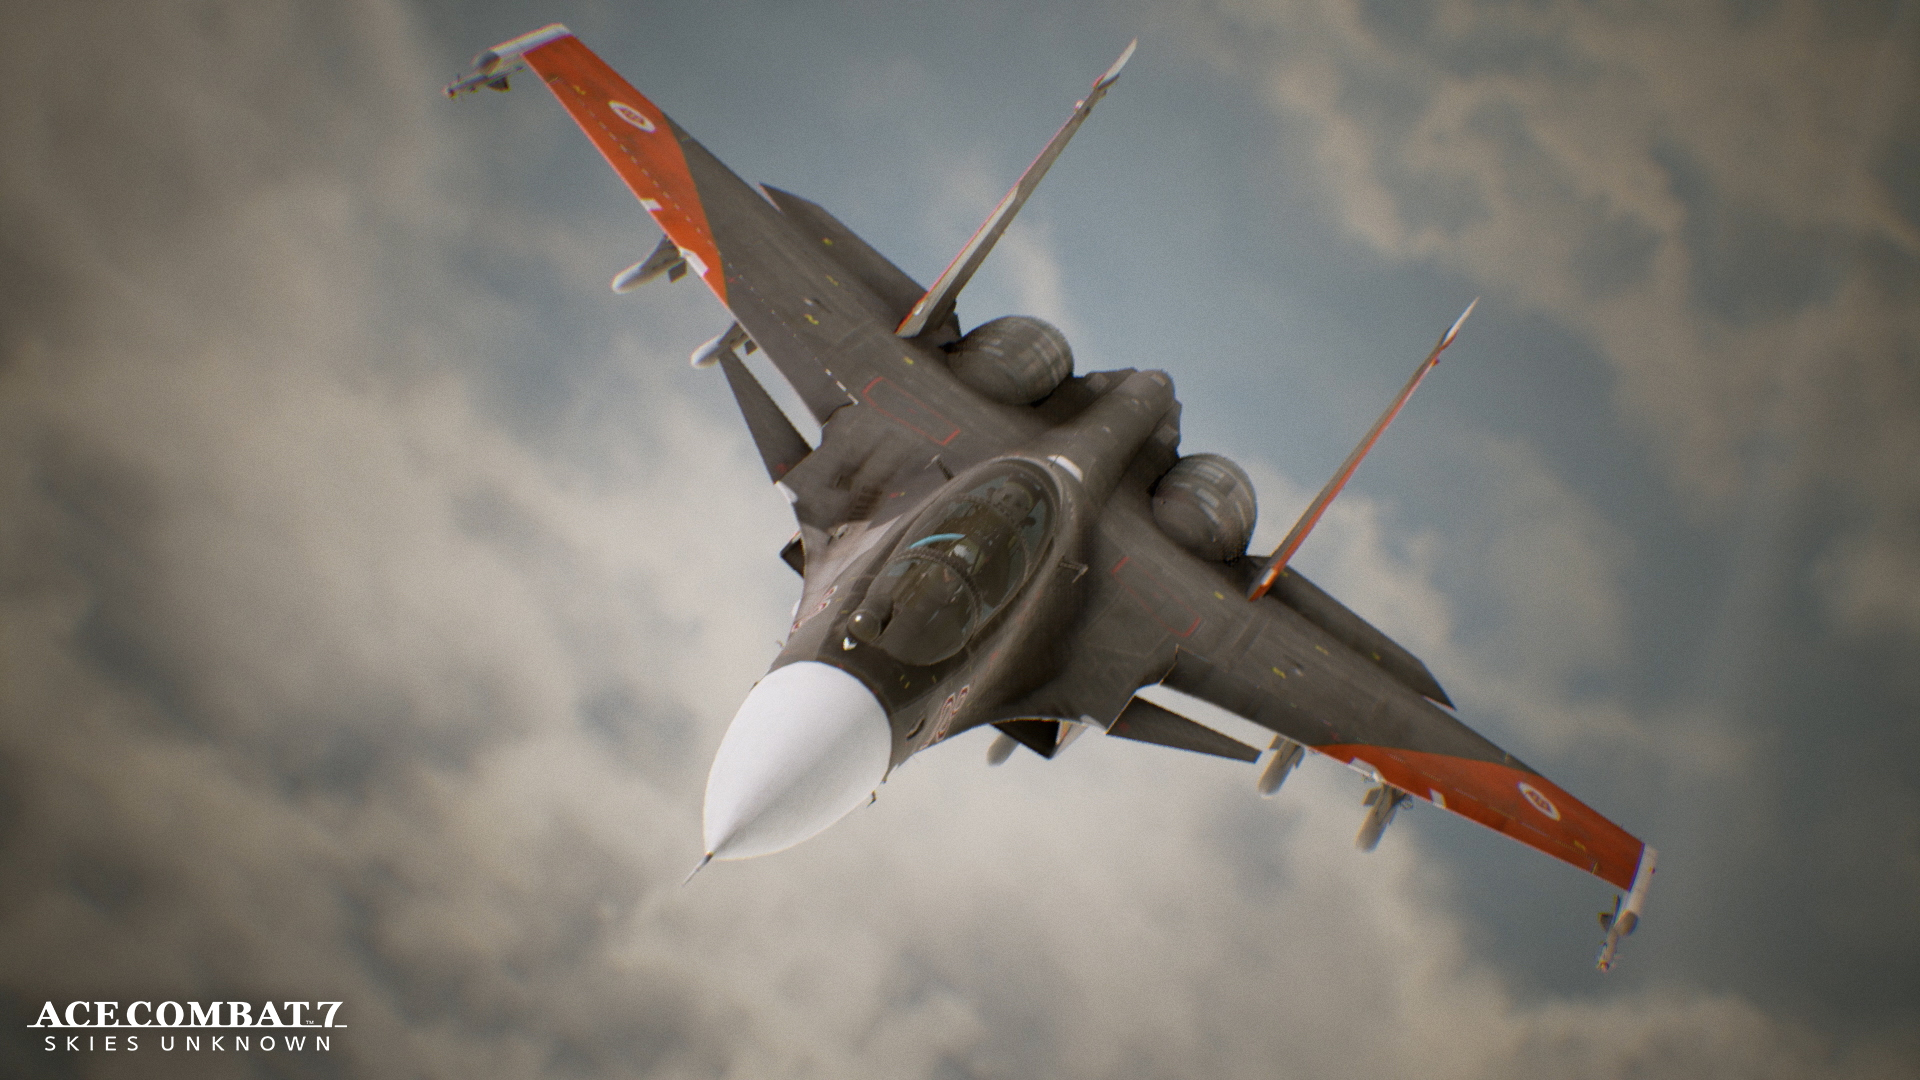 Ace Combat 7: Skies Unknown - Tips and Tricks for Beginners